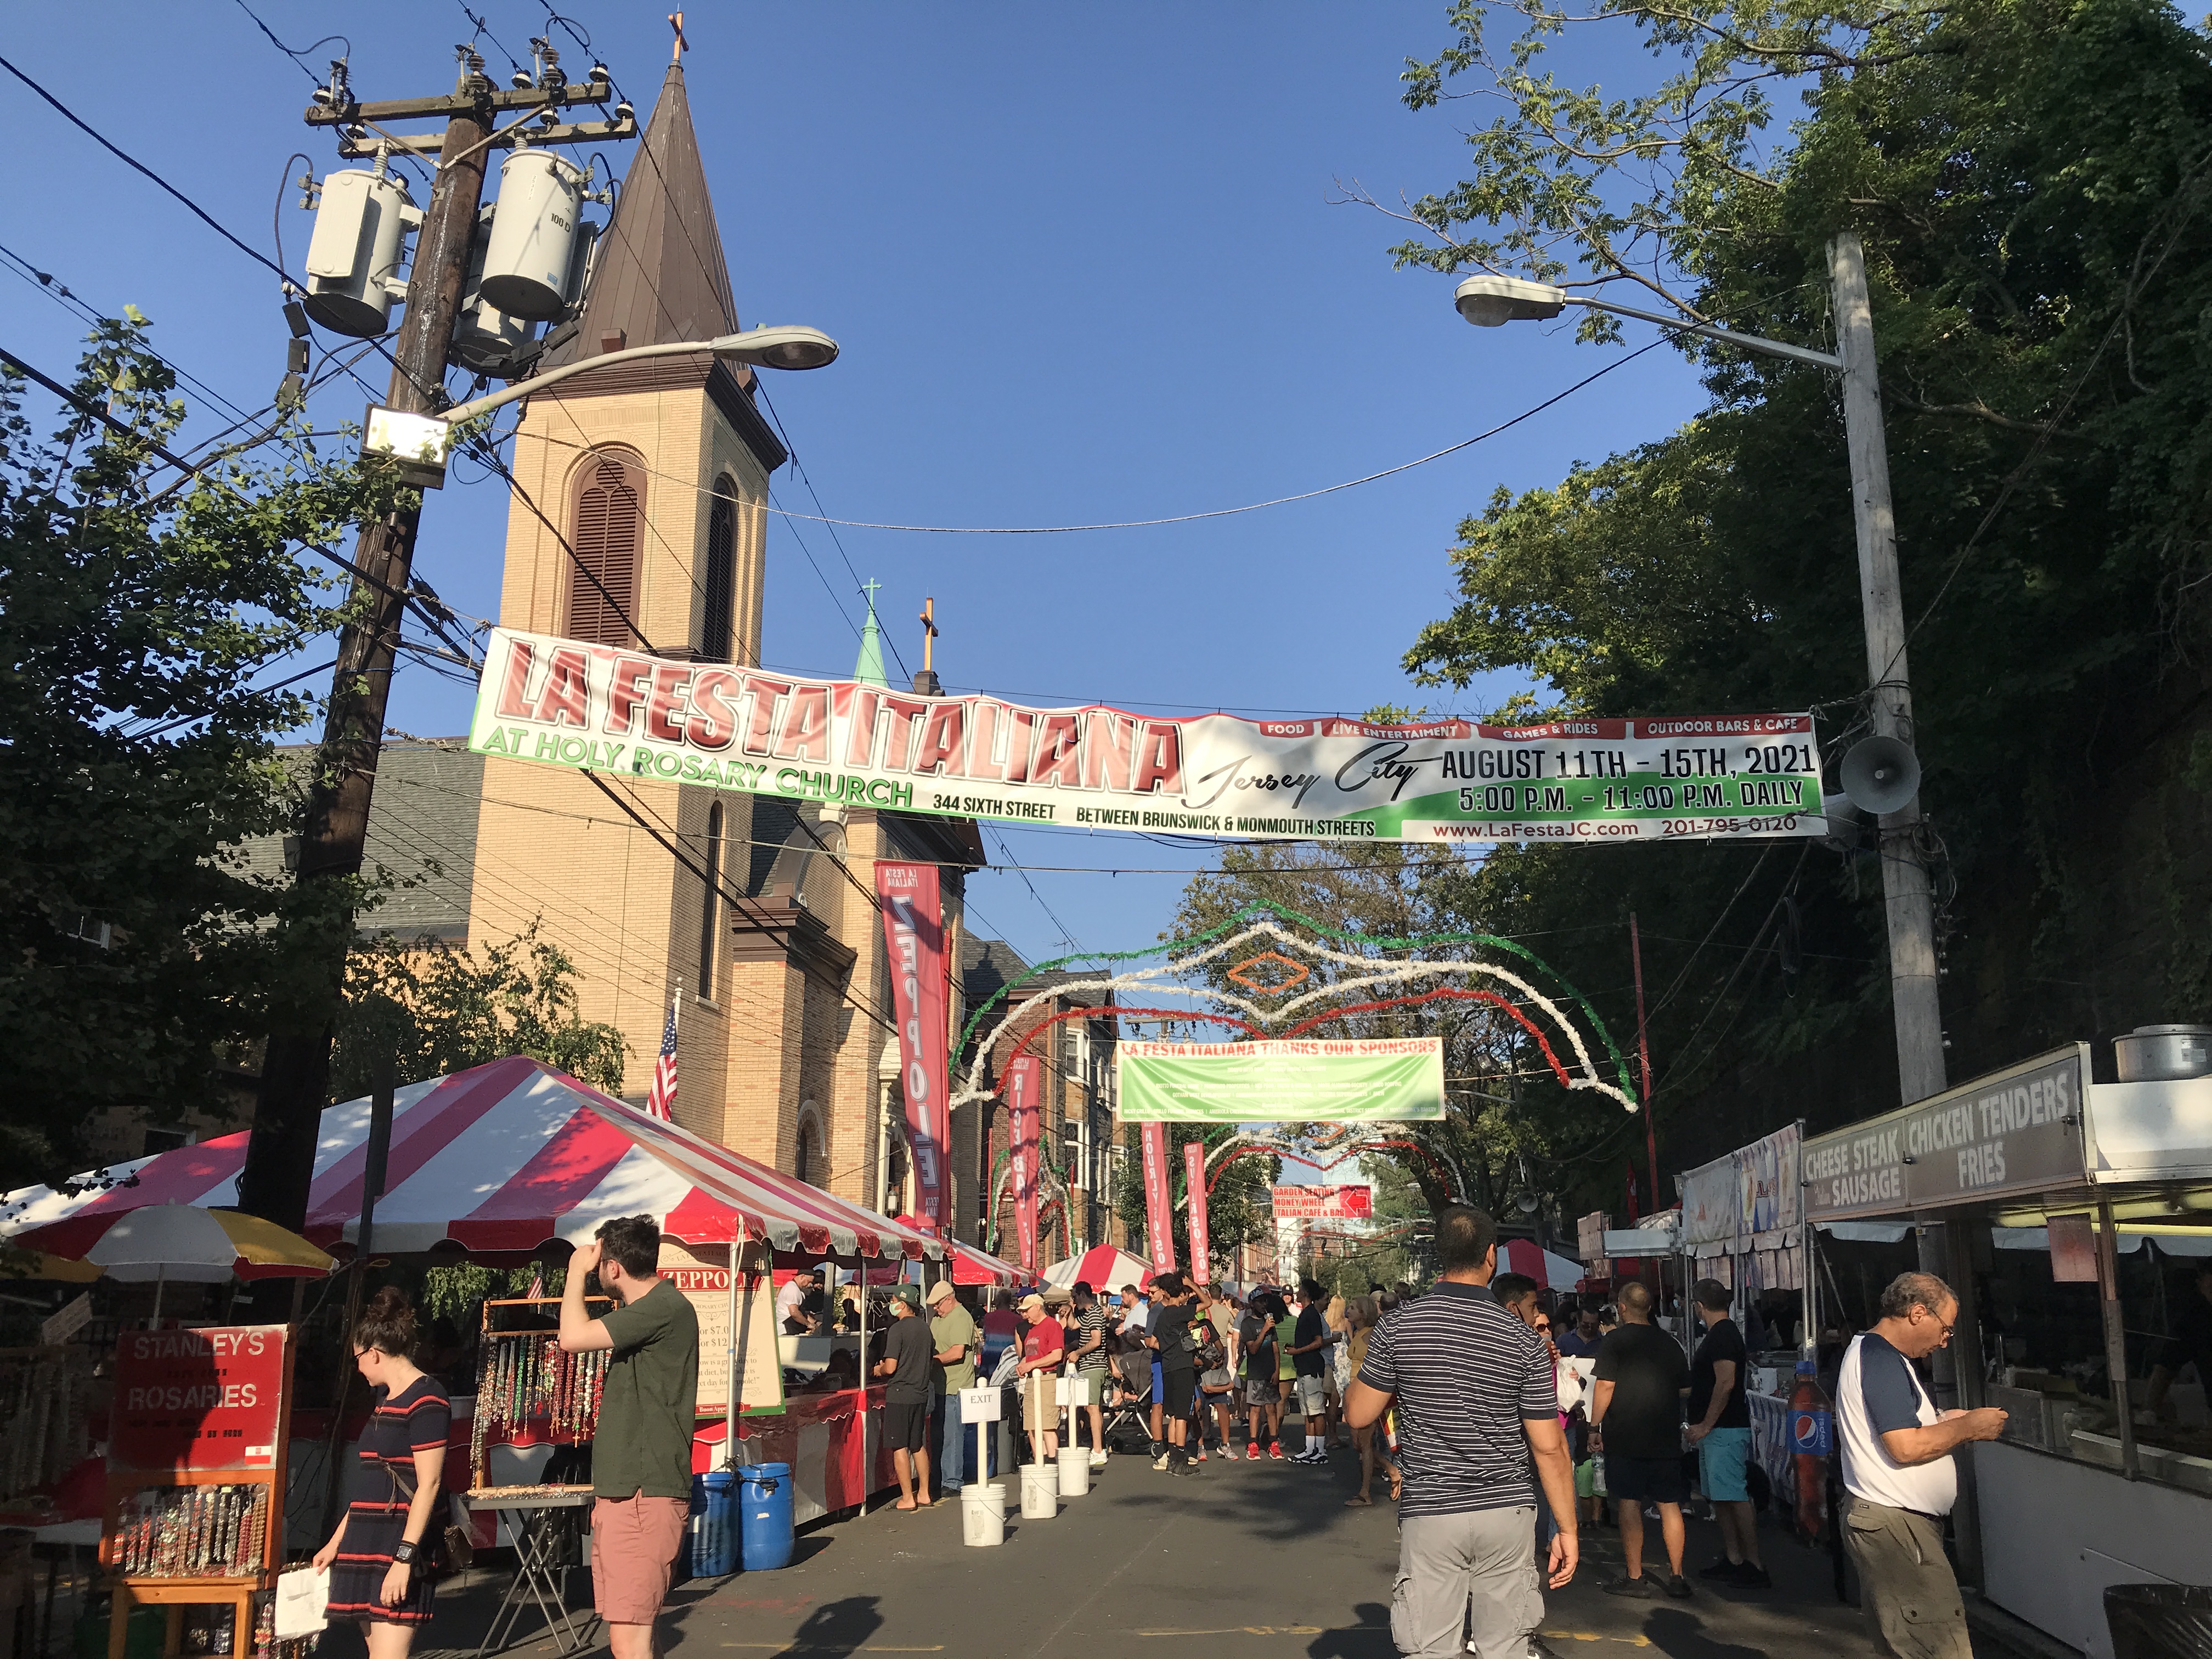 The Italian Festival (or La Festa Italiana) at the base of a church. Banners and street venders line the street. Jersey City, New Jersey, United States